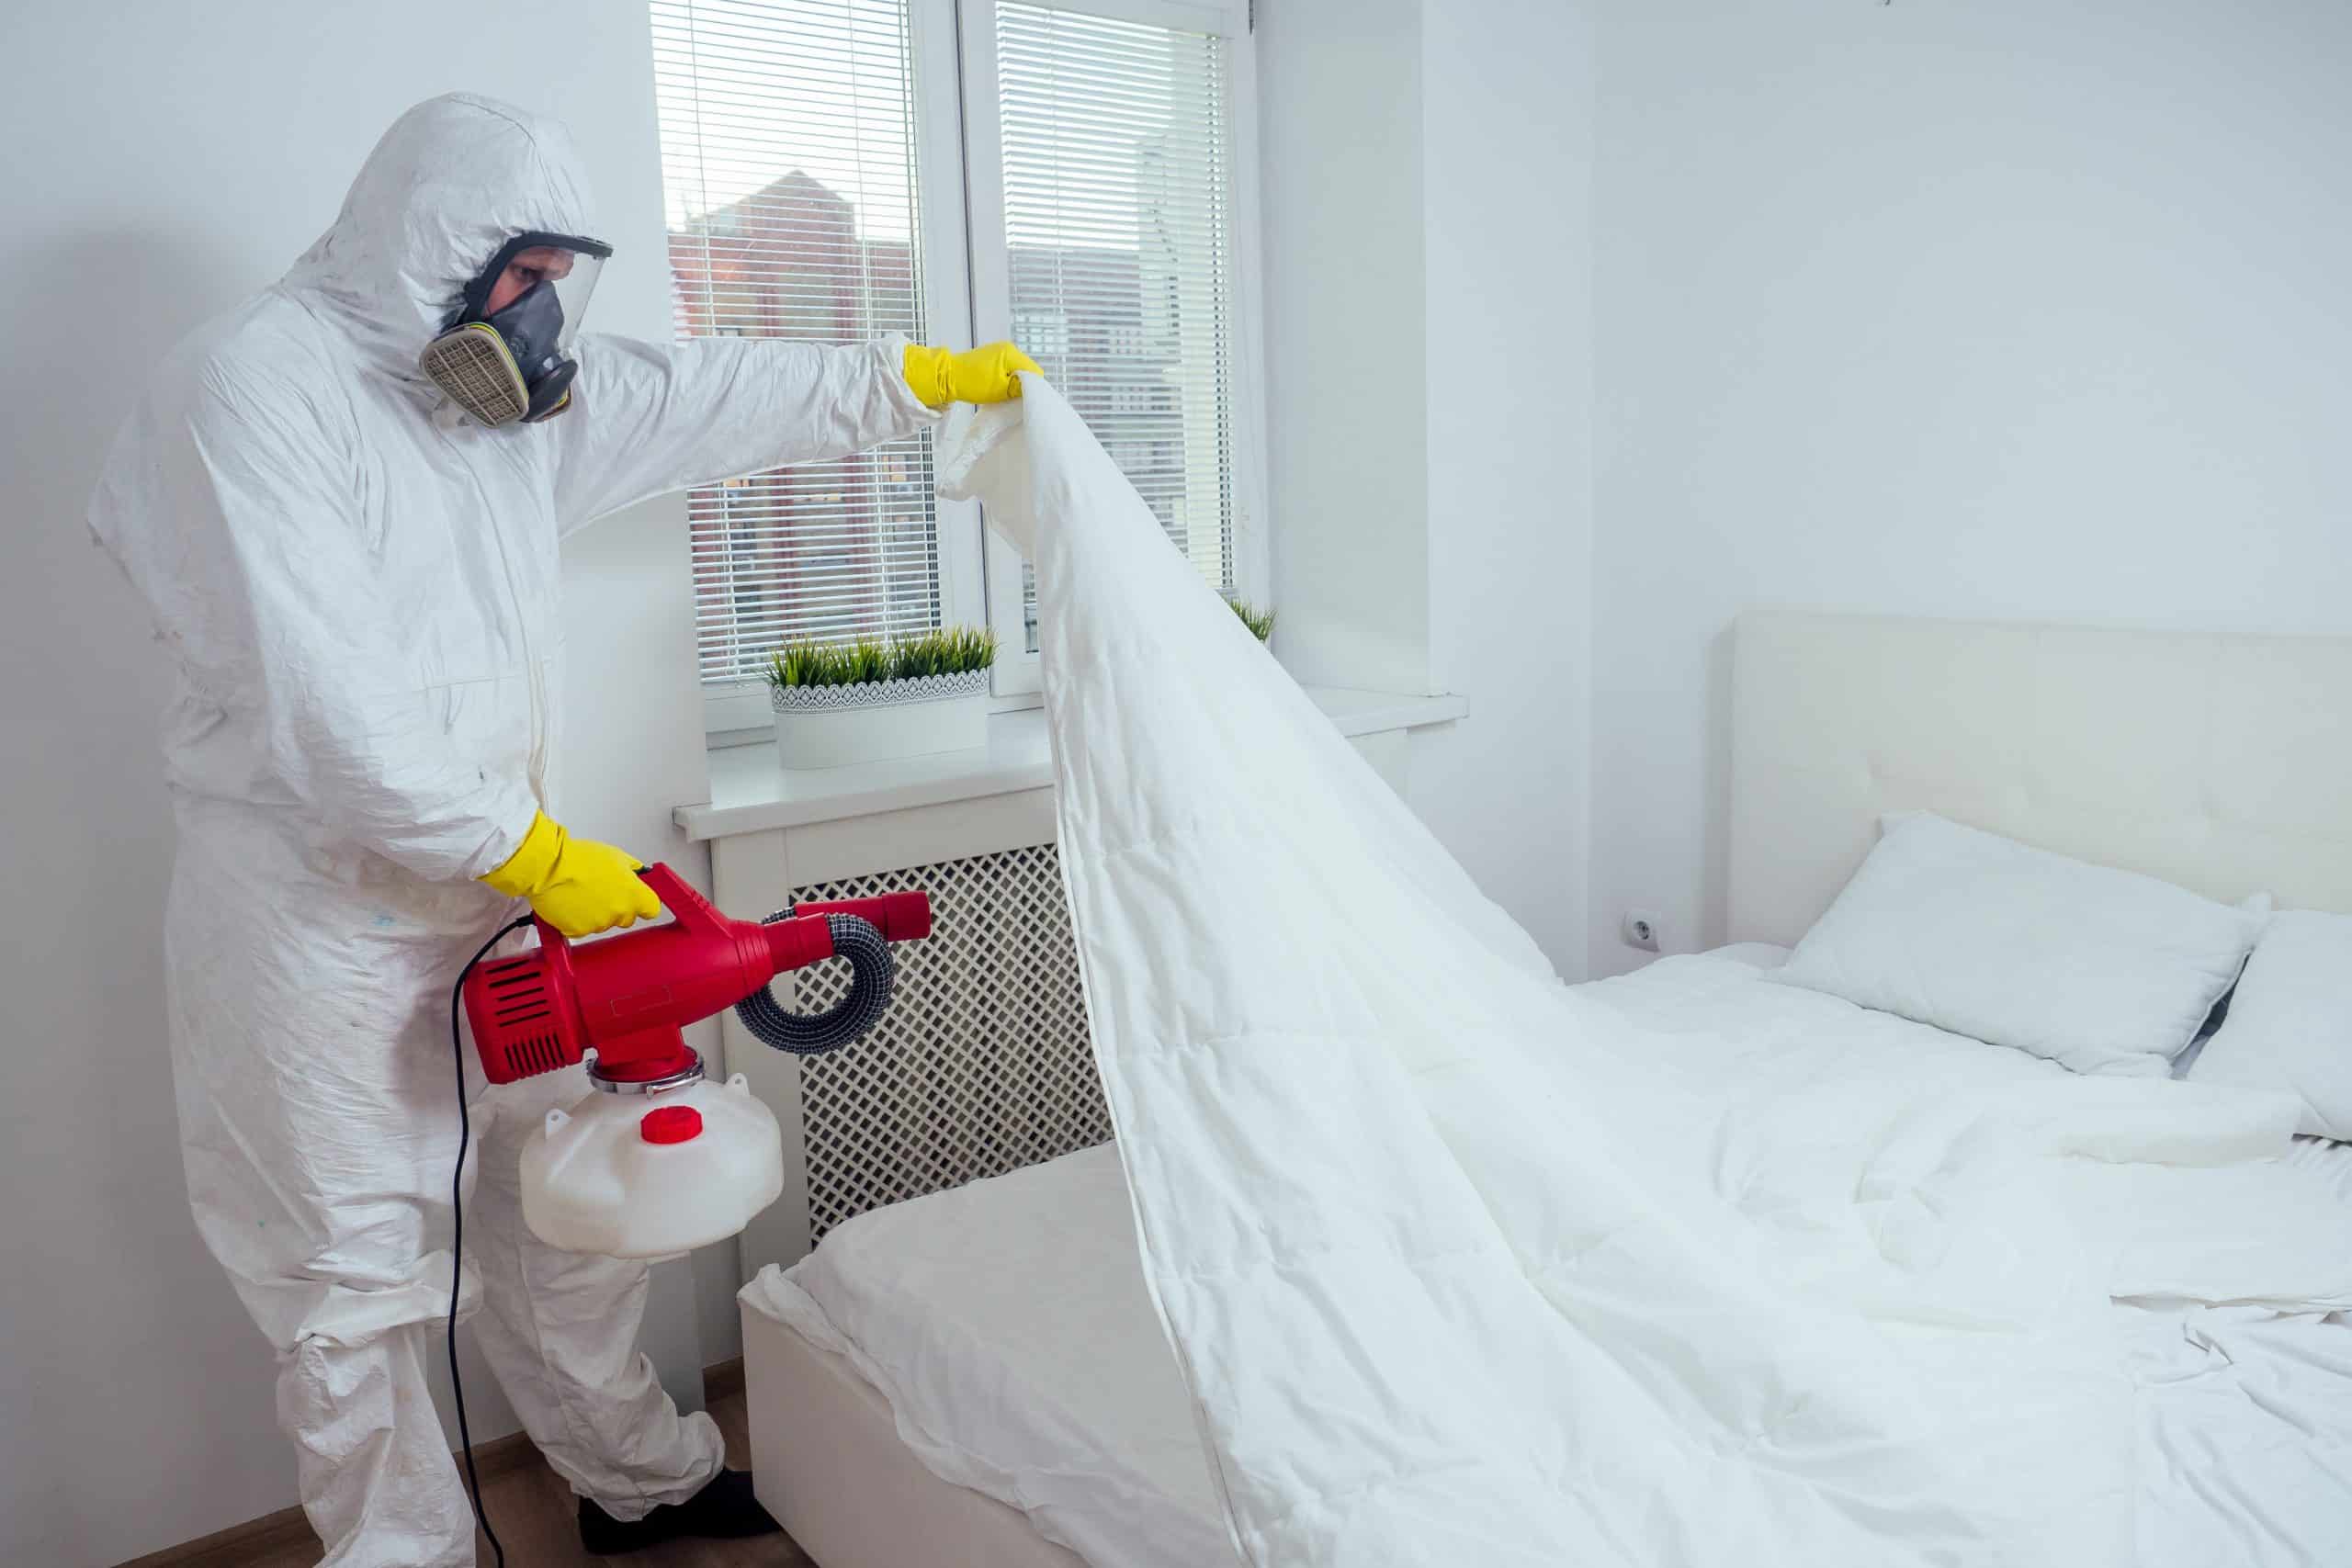 Pest control technician sanitizing a bed for bed bugs